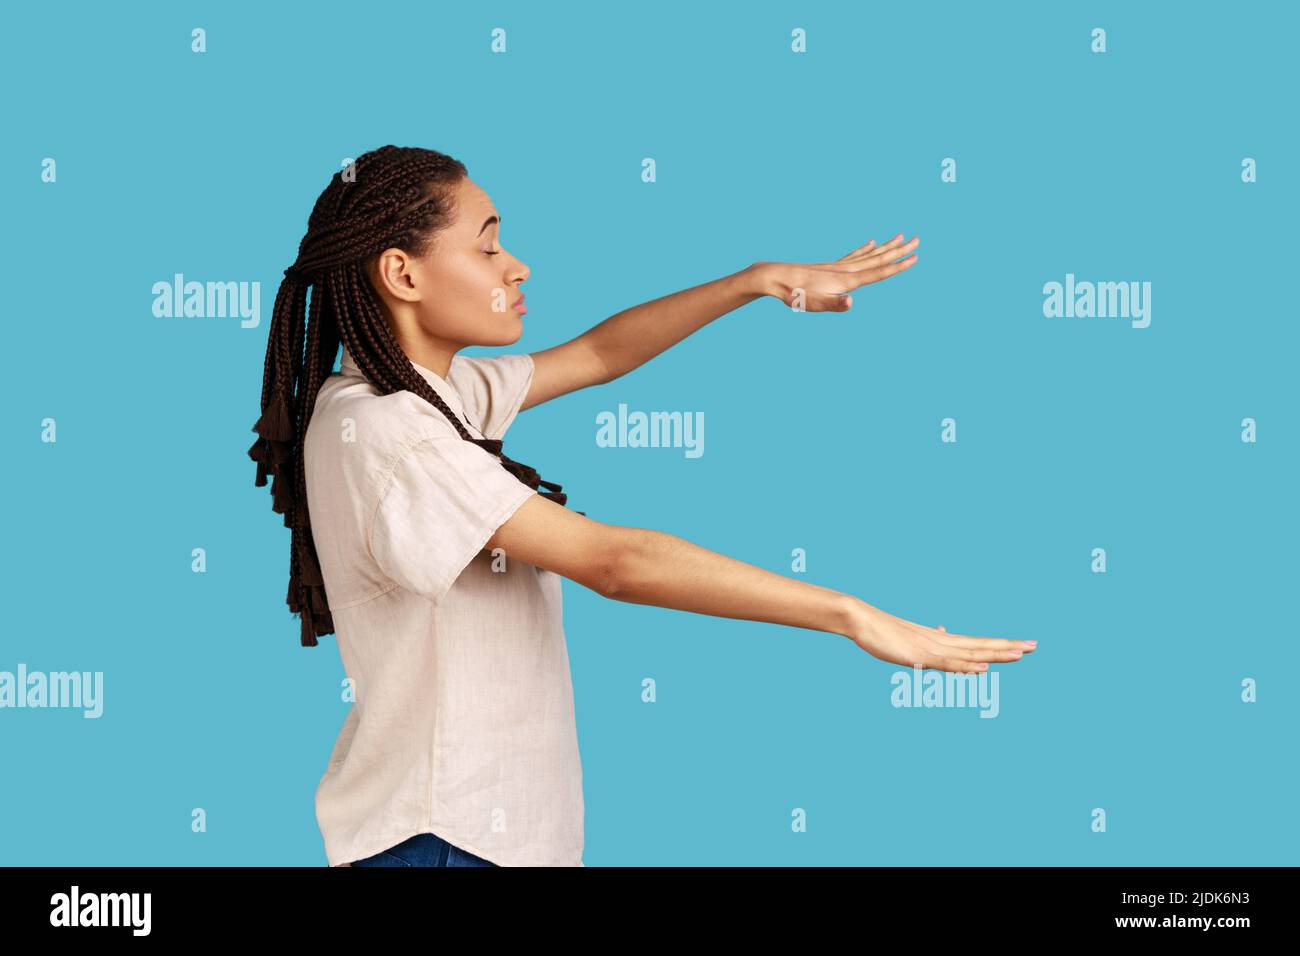 Side view of blind woman with outstretched hands walking alone with closed eyes in darkness, feels disoriented confused, lost road, wearing white shirt. Indoor studio shot isolated on blue background. Stock Photo